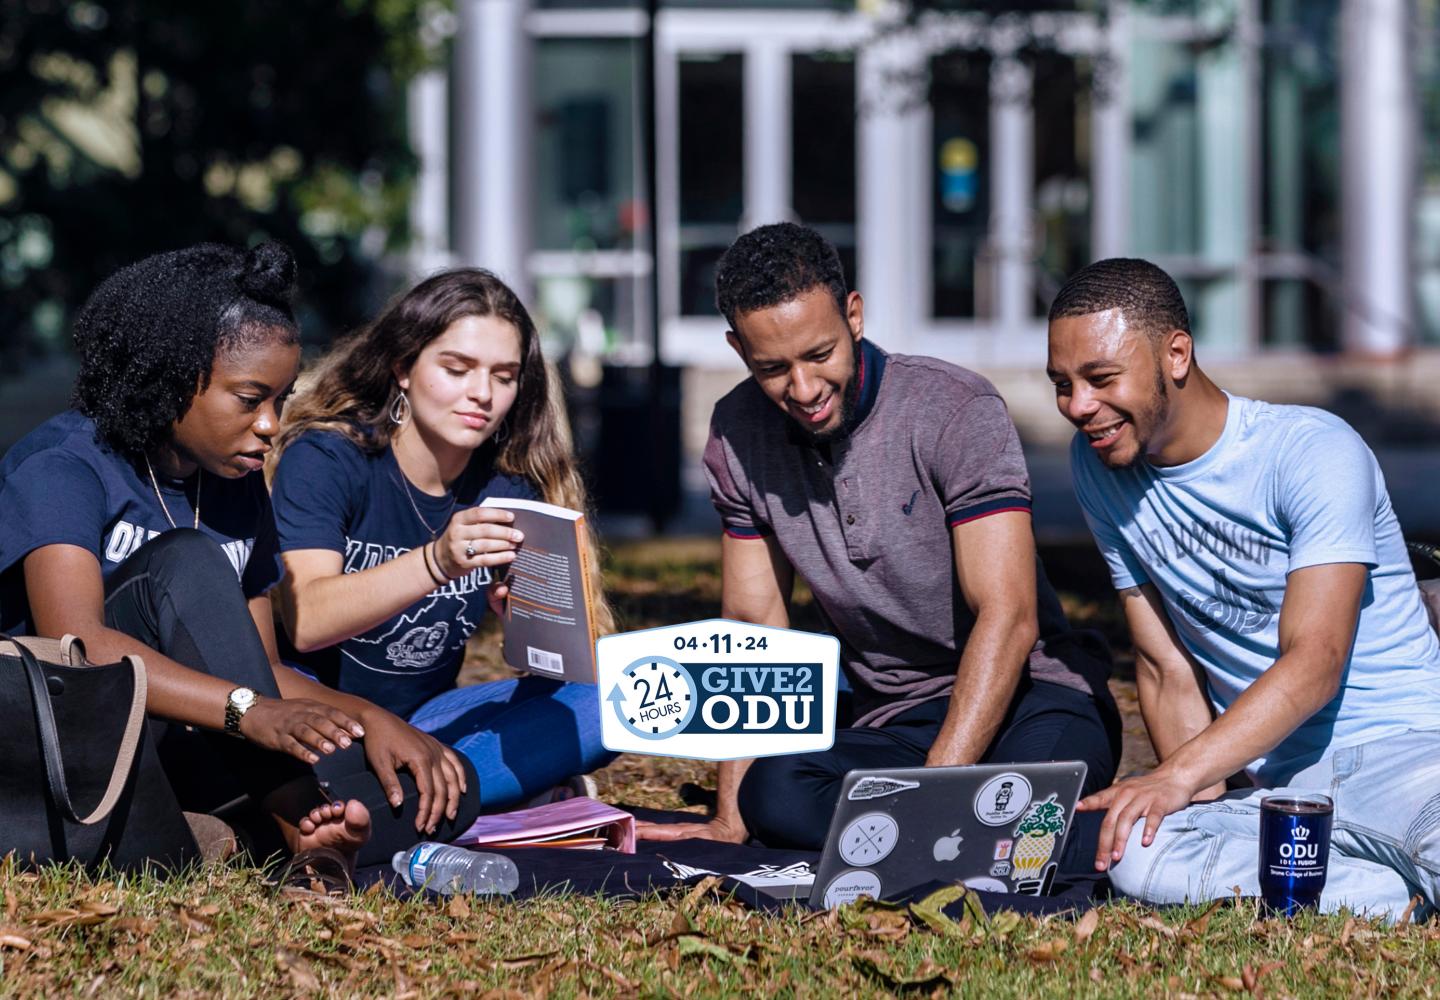 Students in Grass Give2ODU Day